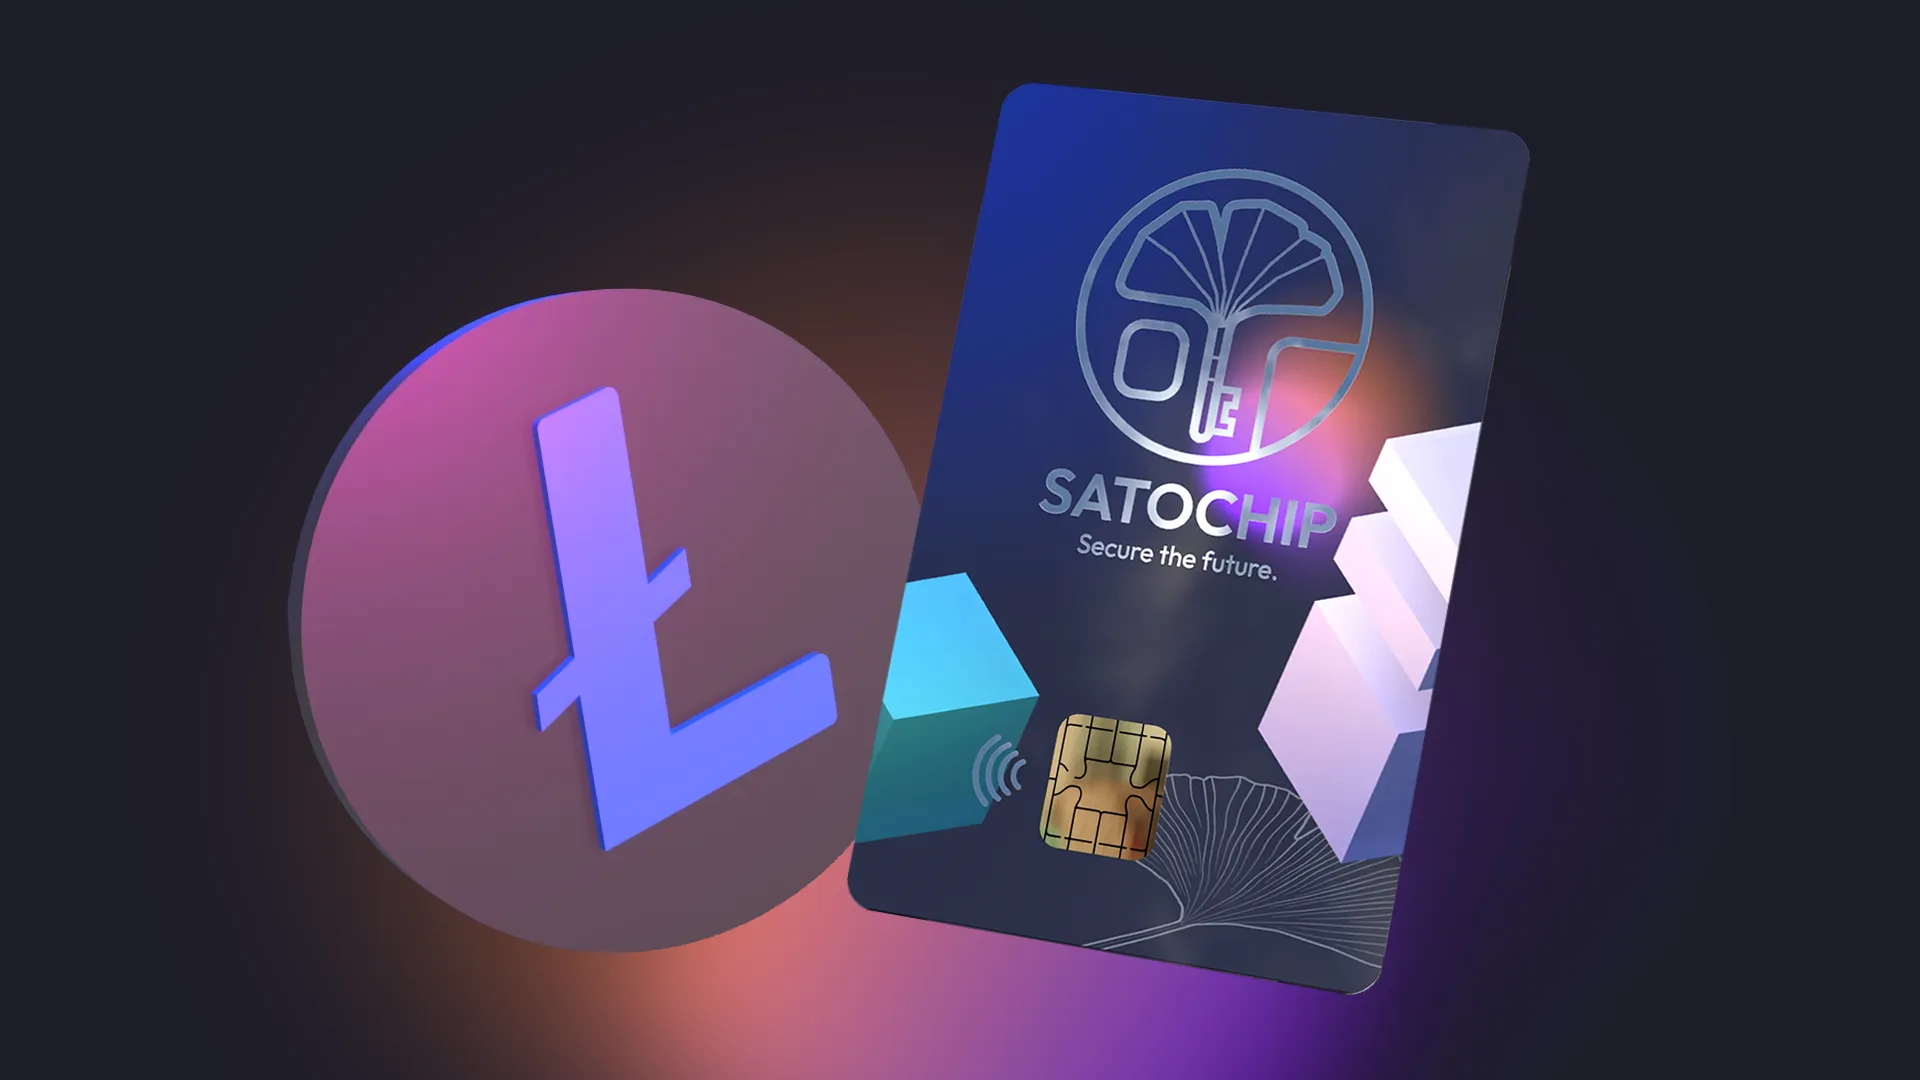 Satochip does support Electrum for Litecoin.